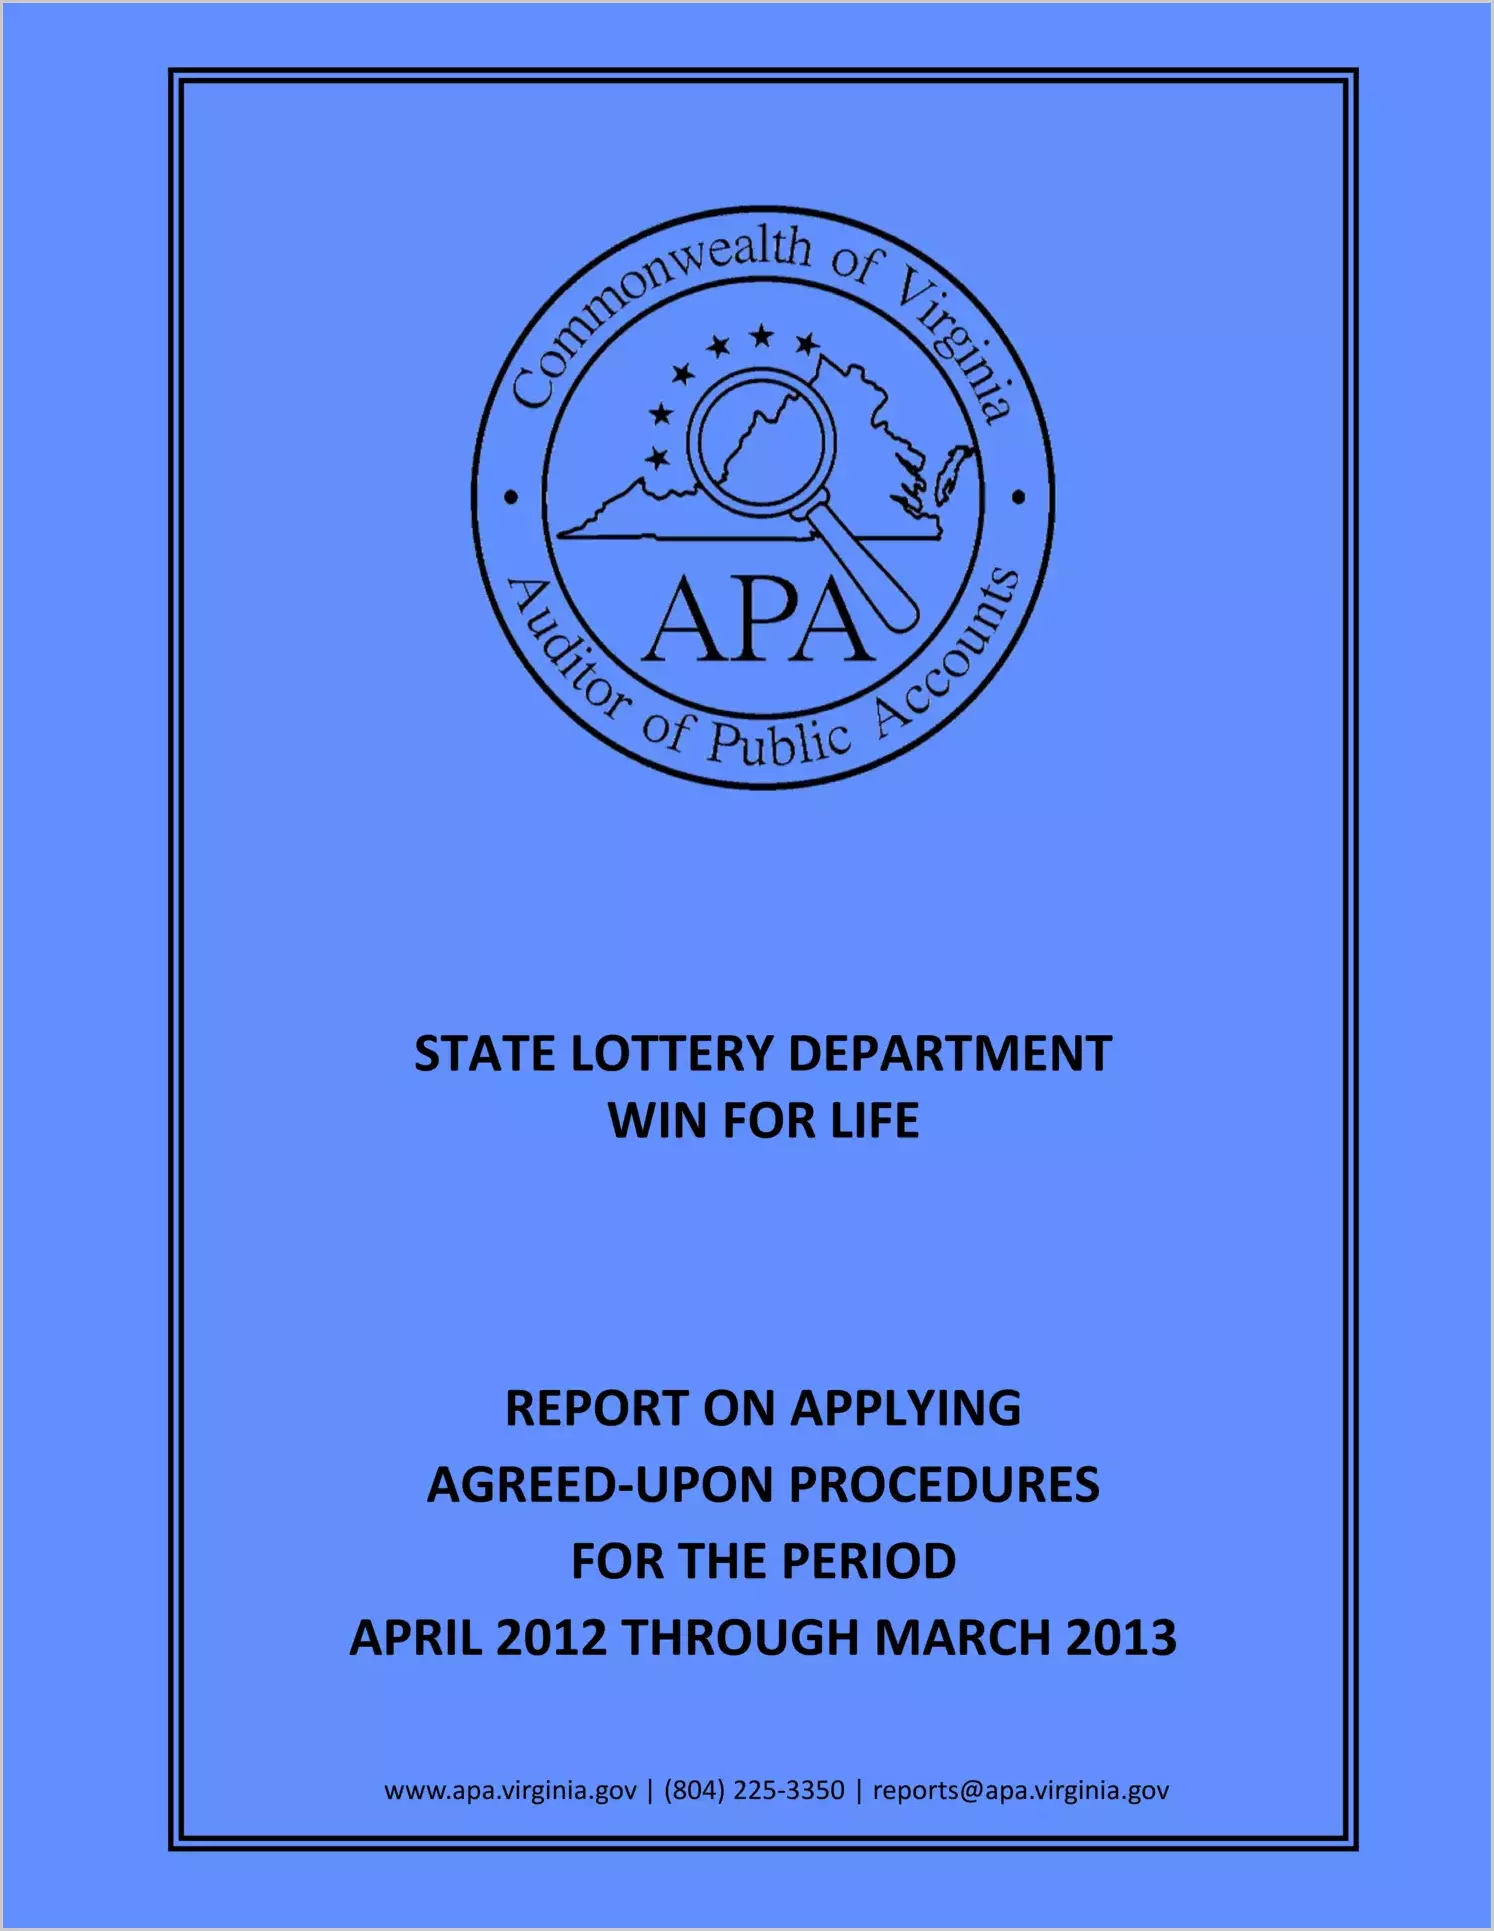 State Lottery Department Win for Life report on Applying Agreed-Upon Procedures for the period April, 2012 throgh March, 2013